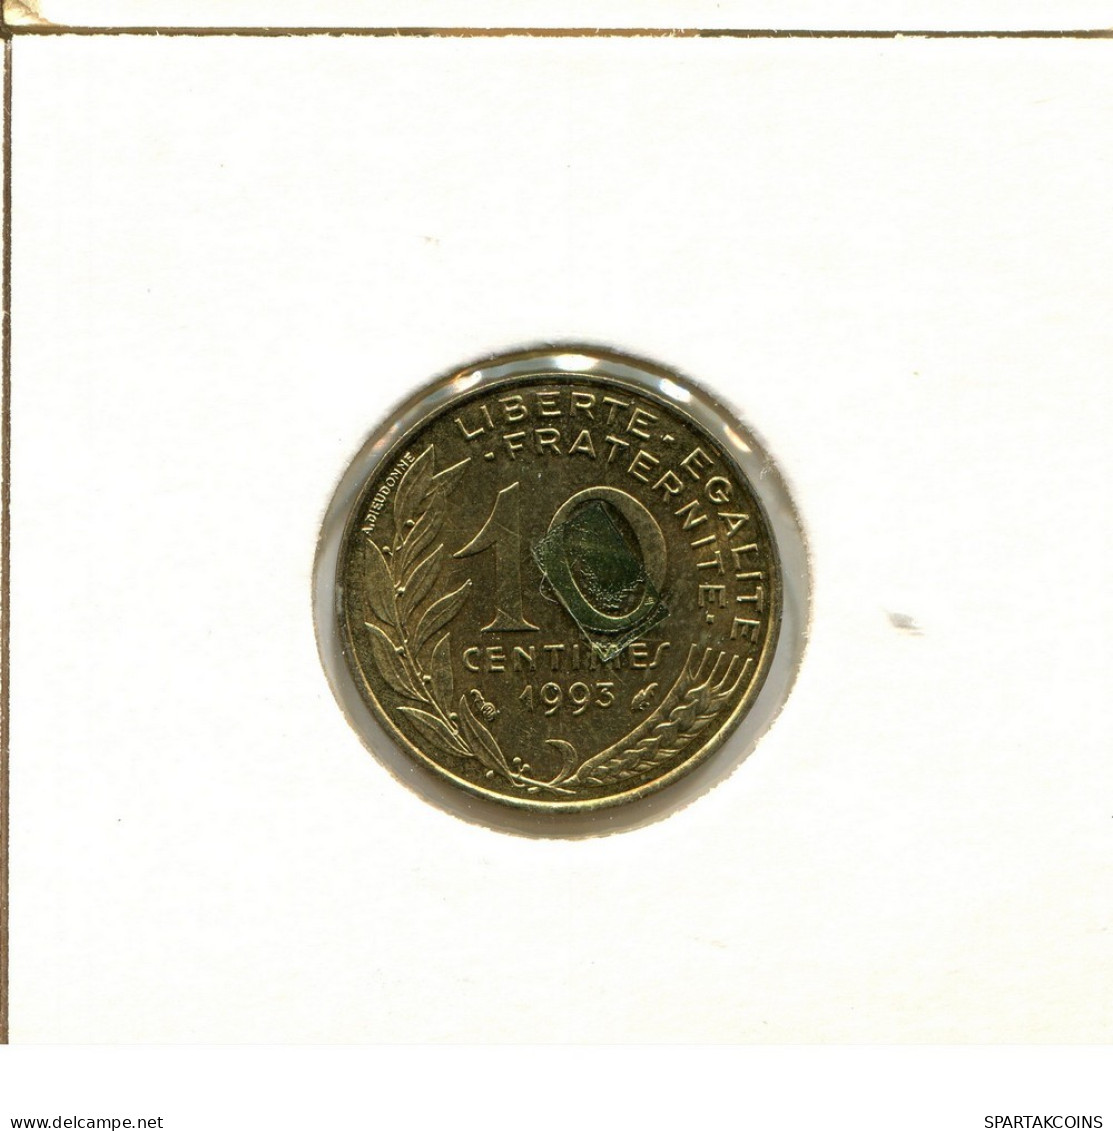 10 CENTIMES 1993 FRANCE Coin #BB471.U.A - 10 Centimes